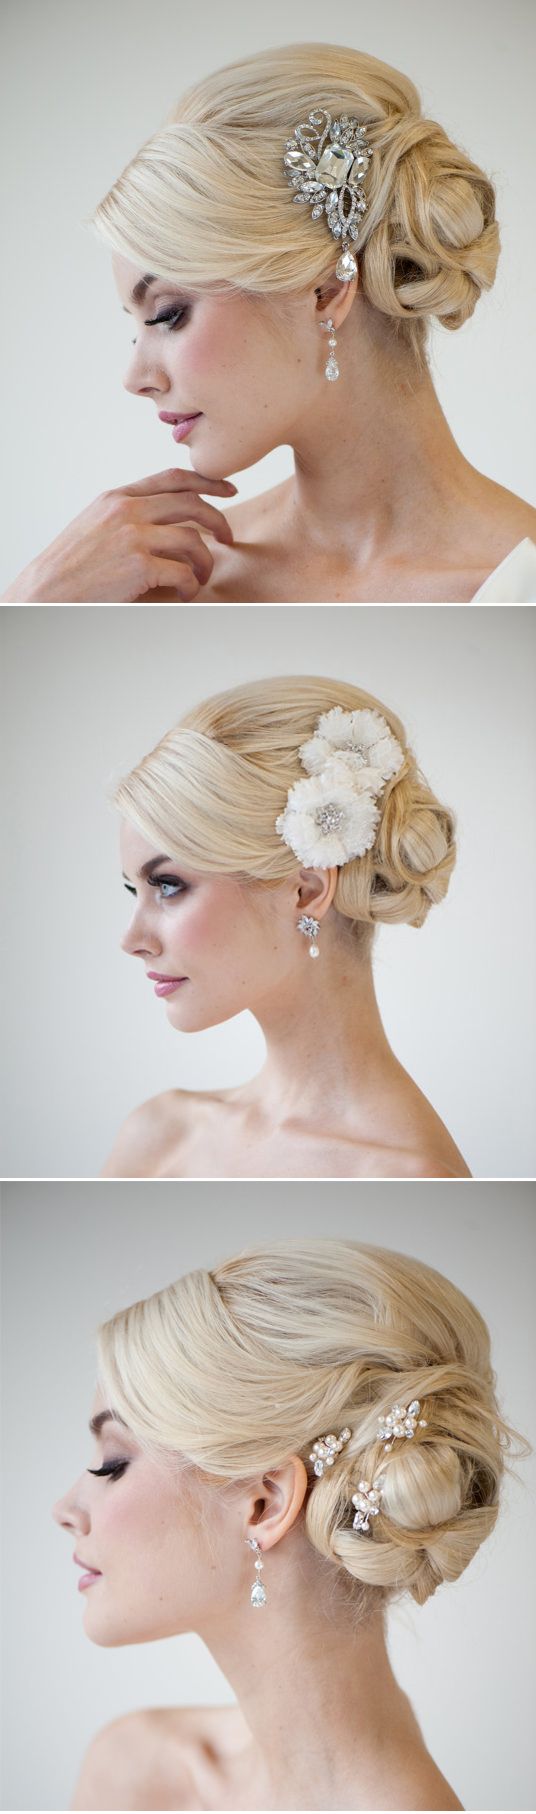 Wedding - ♥~•~♥  ► Hair *•..¸♥☼♥¸.•* And Accesories